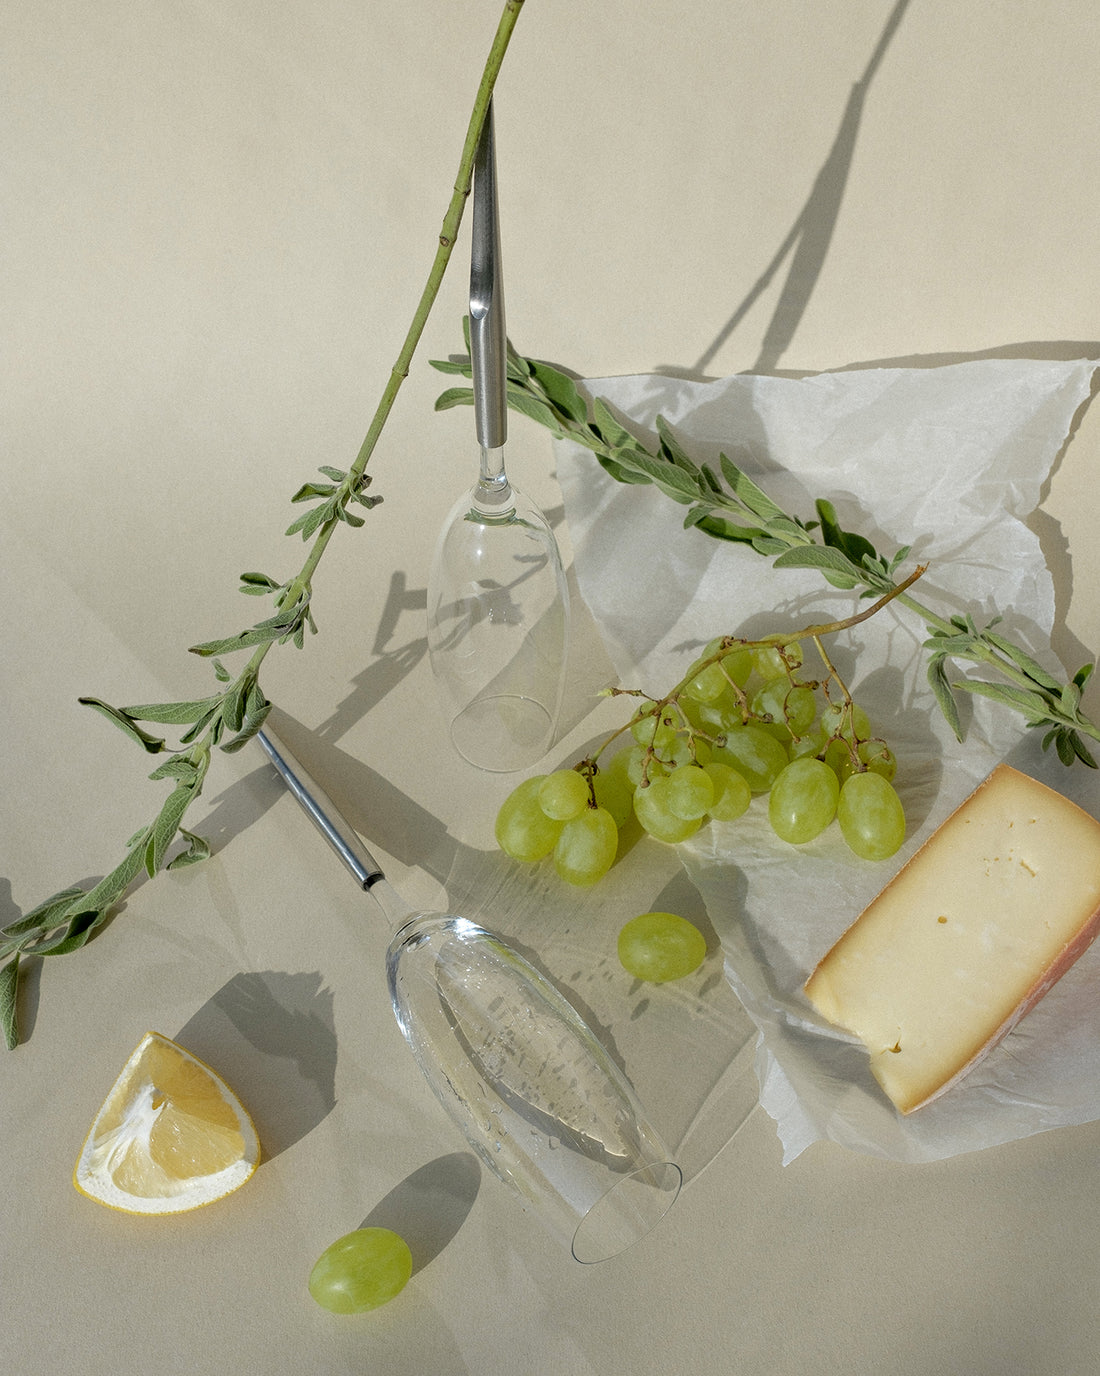 2 pointer wine glasses for champagne photographed on a beige background next to grapes, cheese, lemon and plants